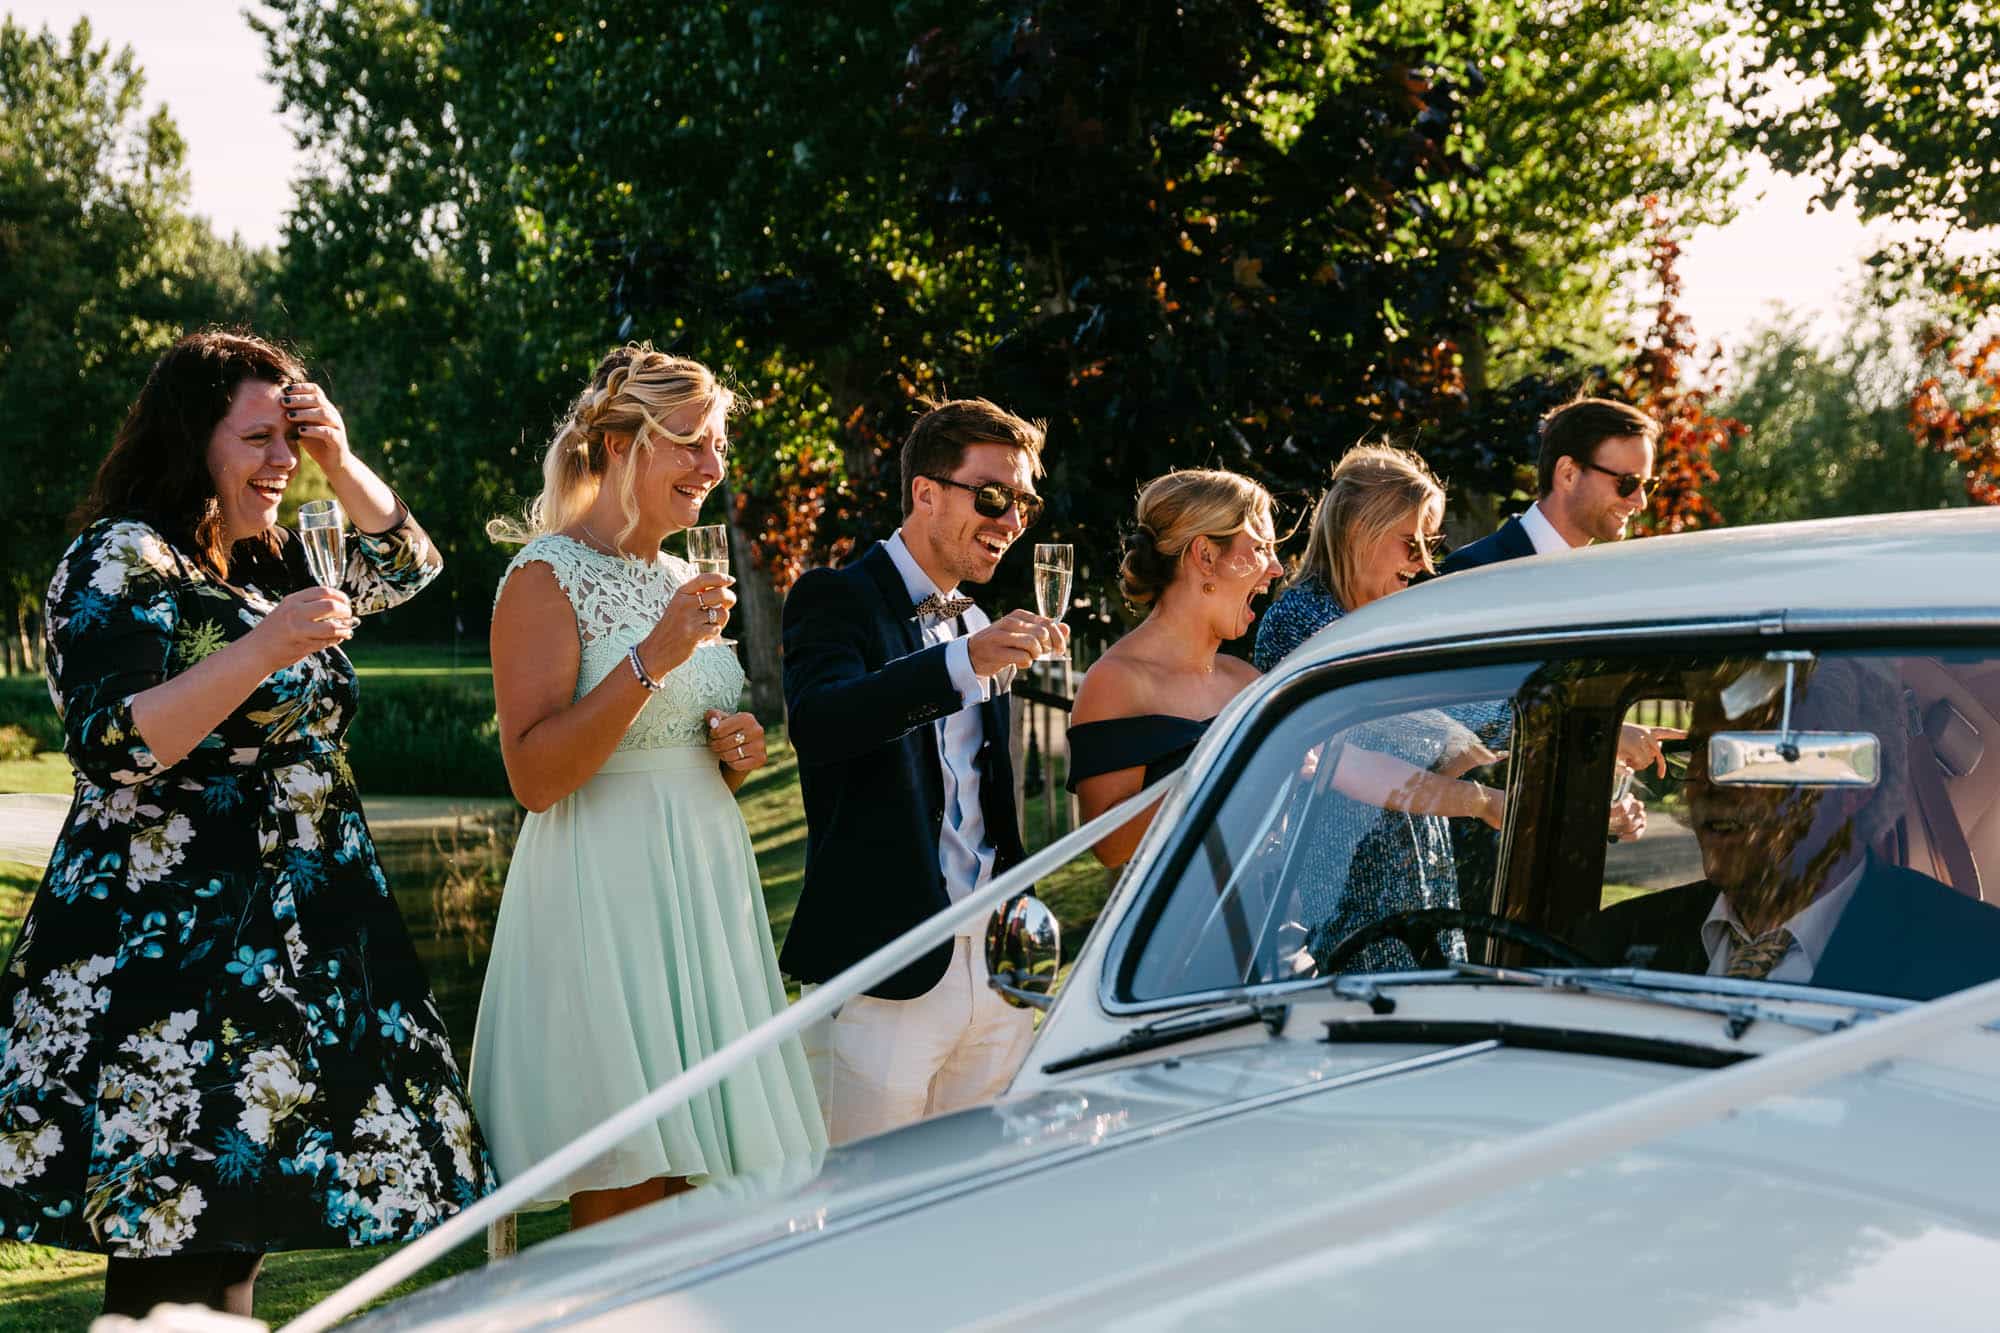 A group of bridesmaids and groom toast in front of a vintage car.